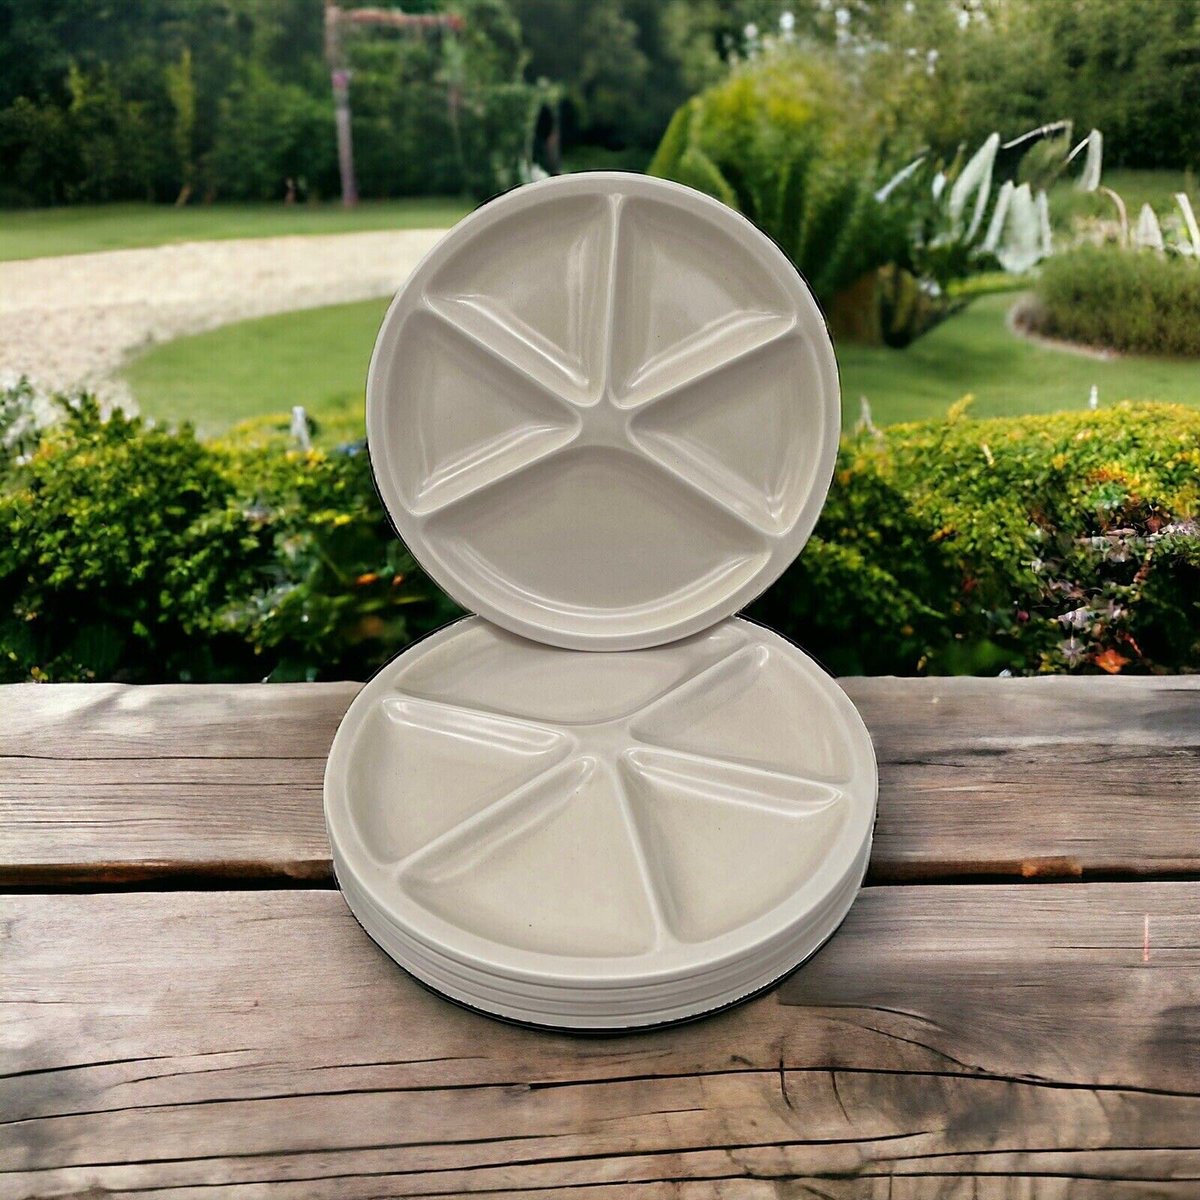 French Le Creuset divided plate set £64.99 free postage #allthingsfrenchstore #lecreuset #buyvintage #bargainhunt allthingsfrenchstore.etsy.com/listing/162788…